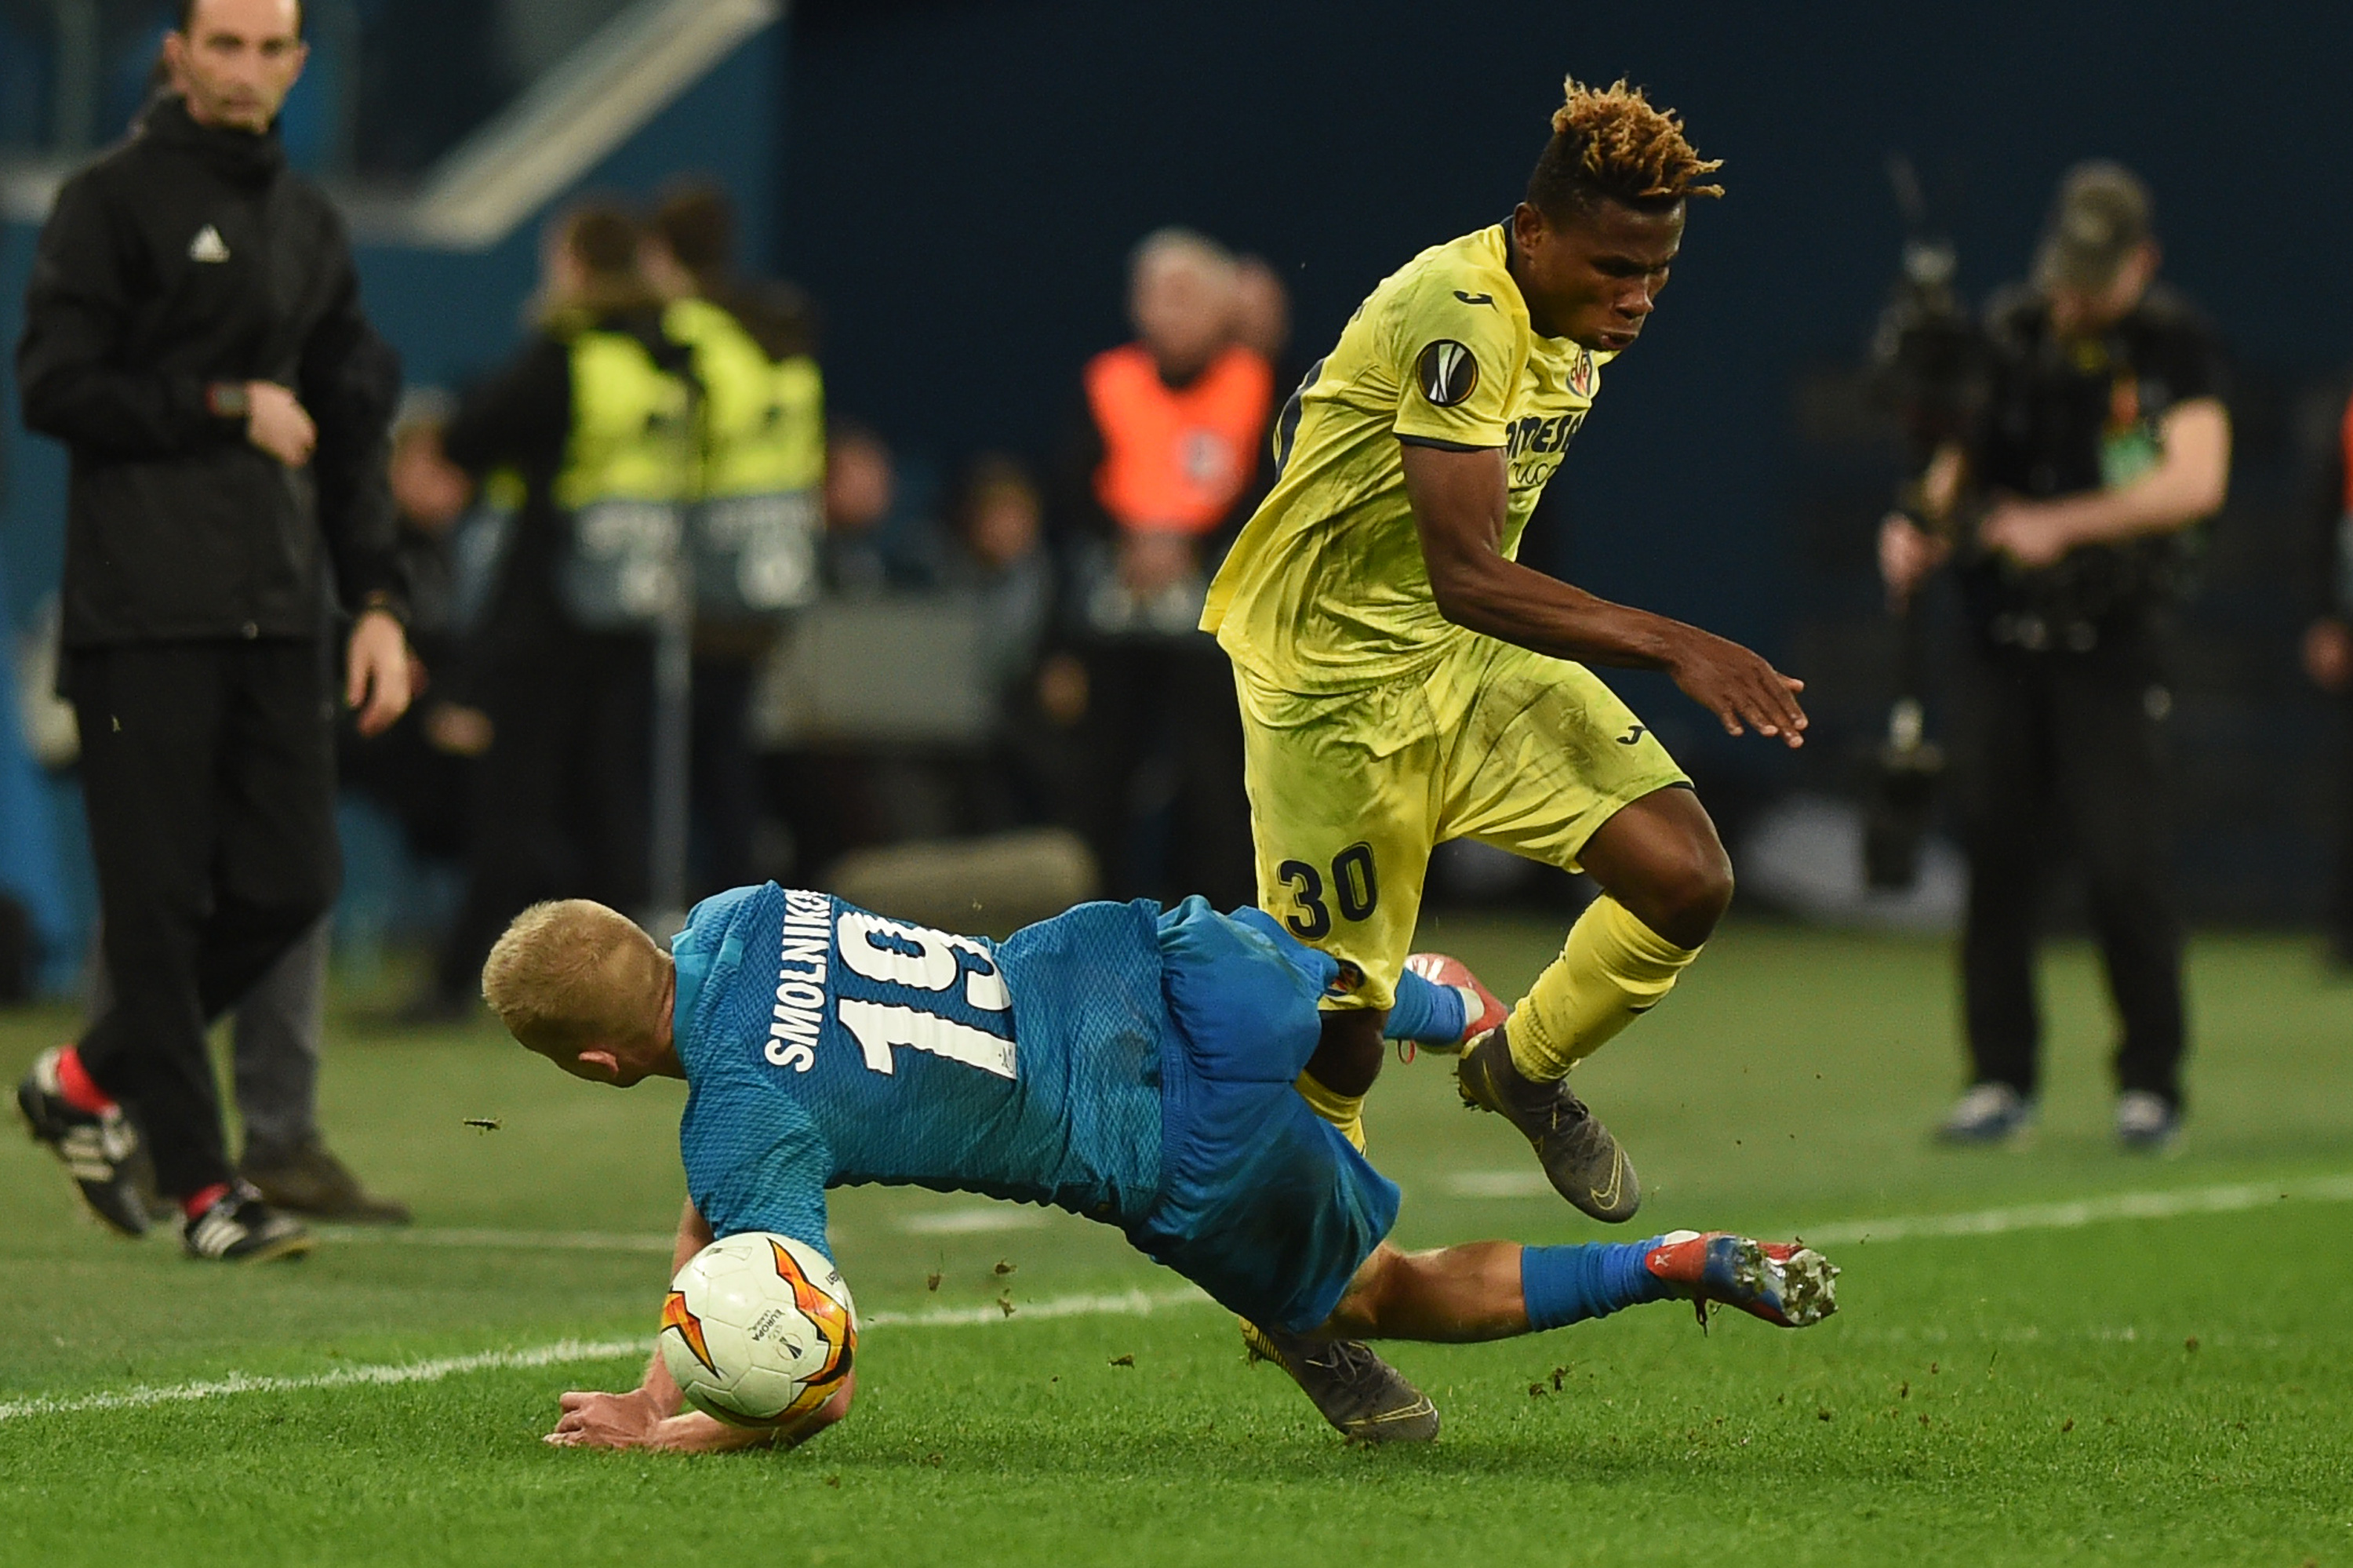 Zenit St. Petersburg's Russian defender Igor Smolnikov and Villarreal's Nigerian midfielder Samuel Chukwueze vie for the ball during the Europa League round of 16 first leg football match between FC Zenit and Villarreal CF in Saint Petersburg on March 7, 2019. (Photo by Olga MALTSEVA / AFP)        (Photo credit should read OLGA MALTSEVA/AFP/Getty Images)